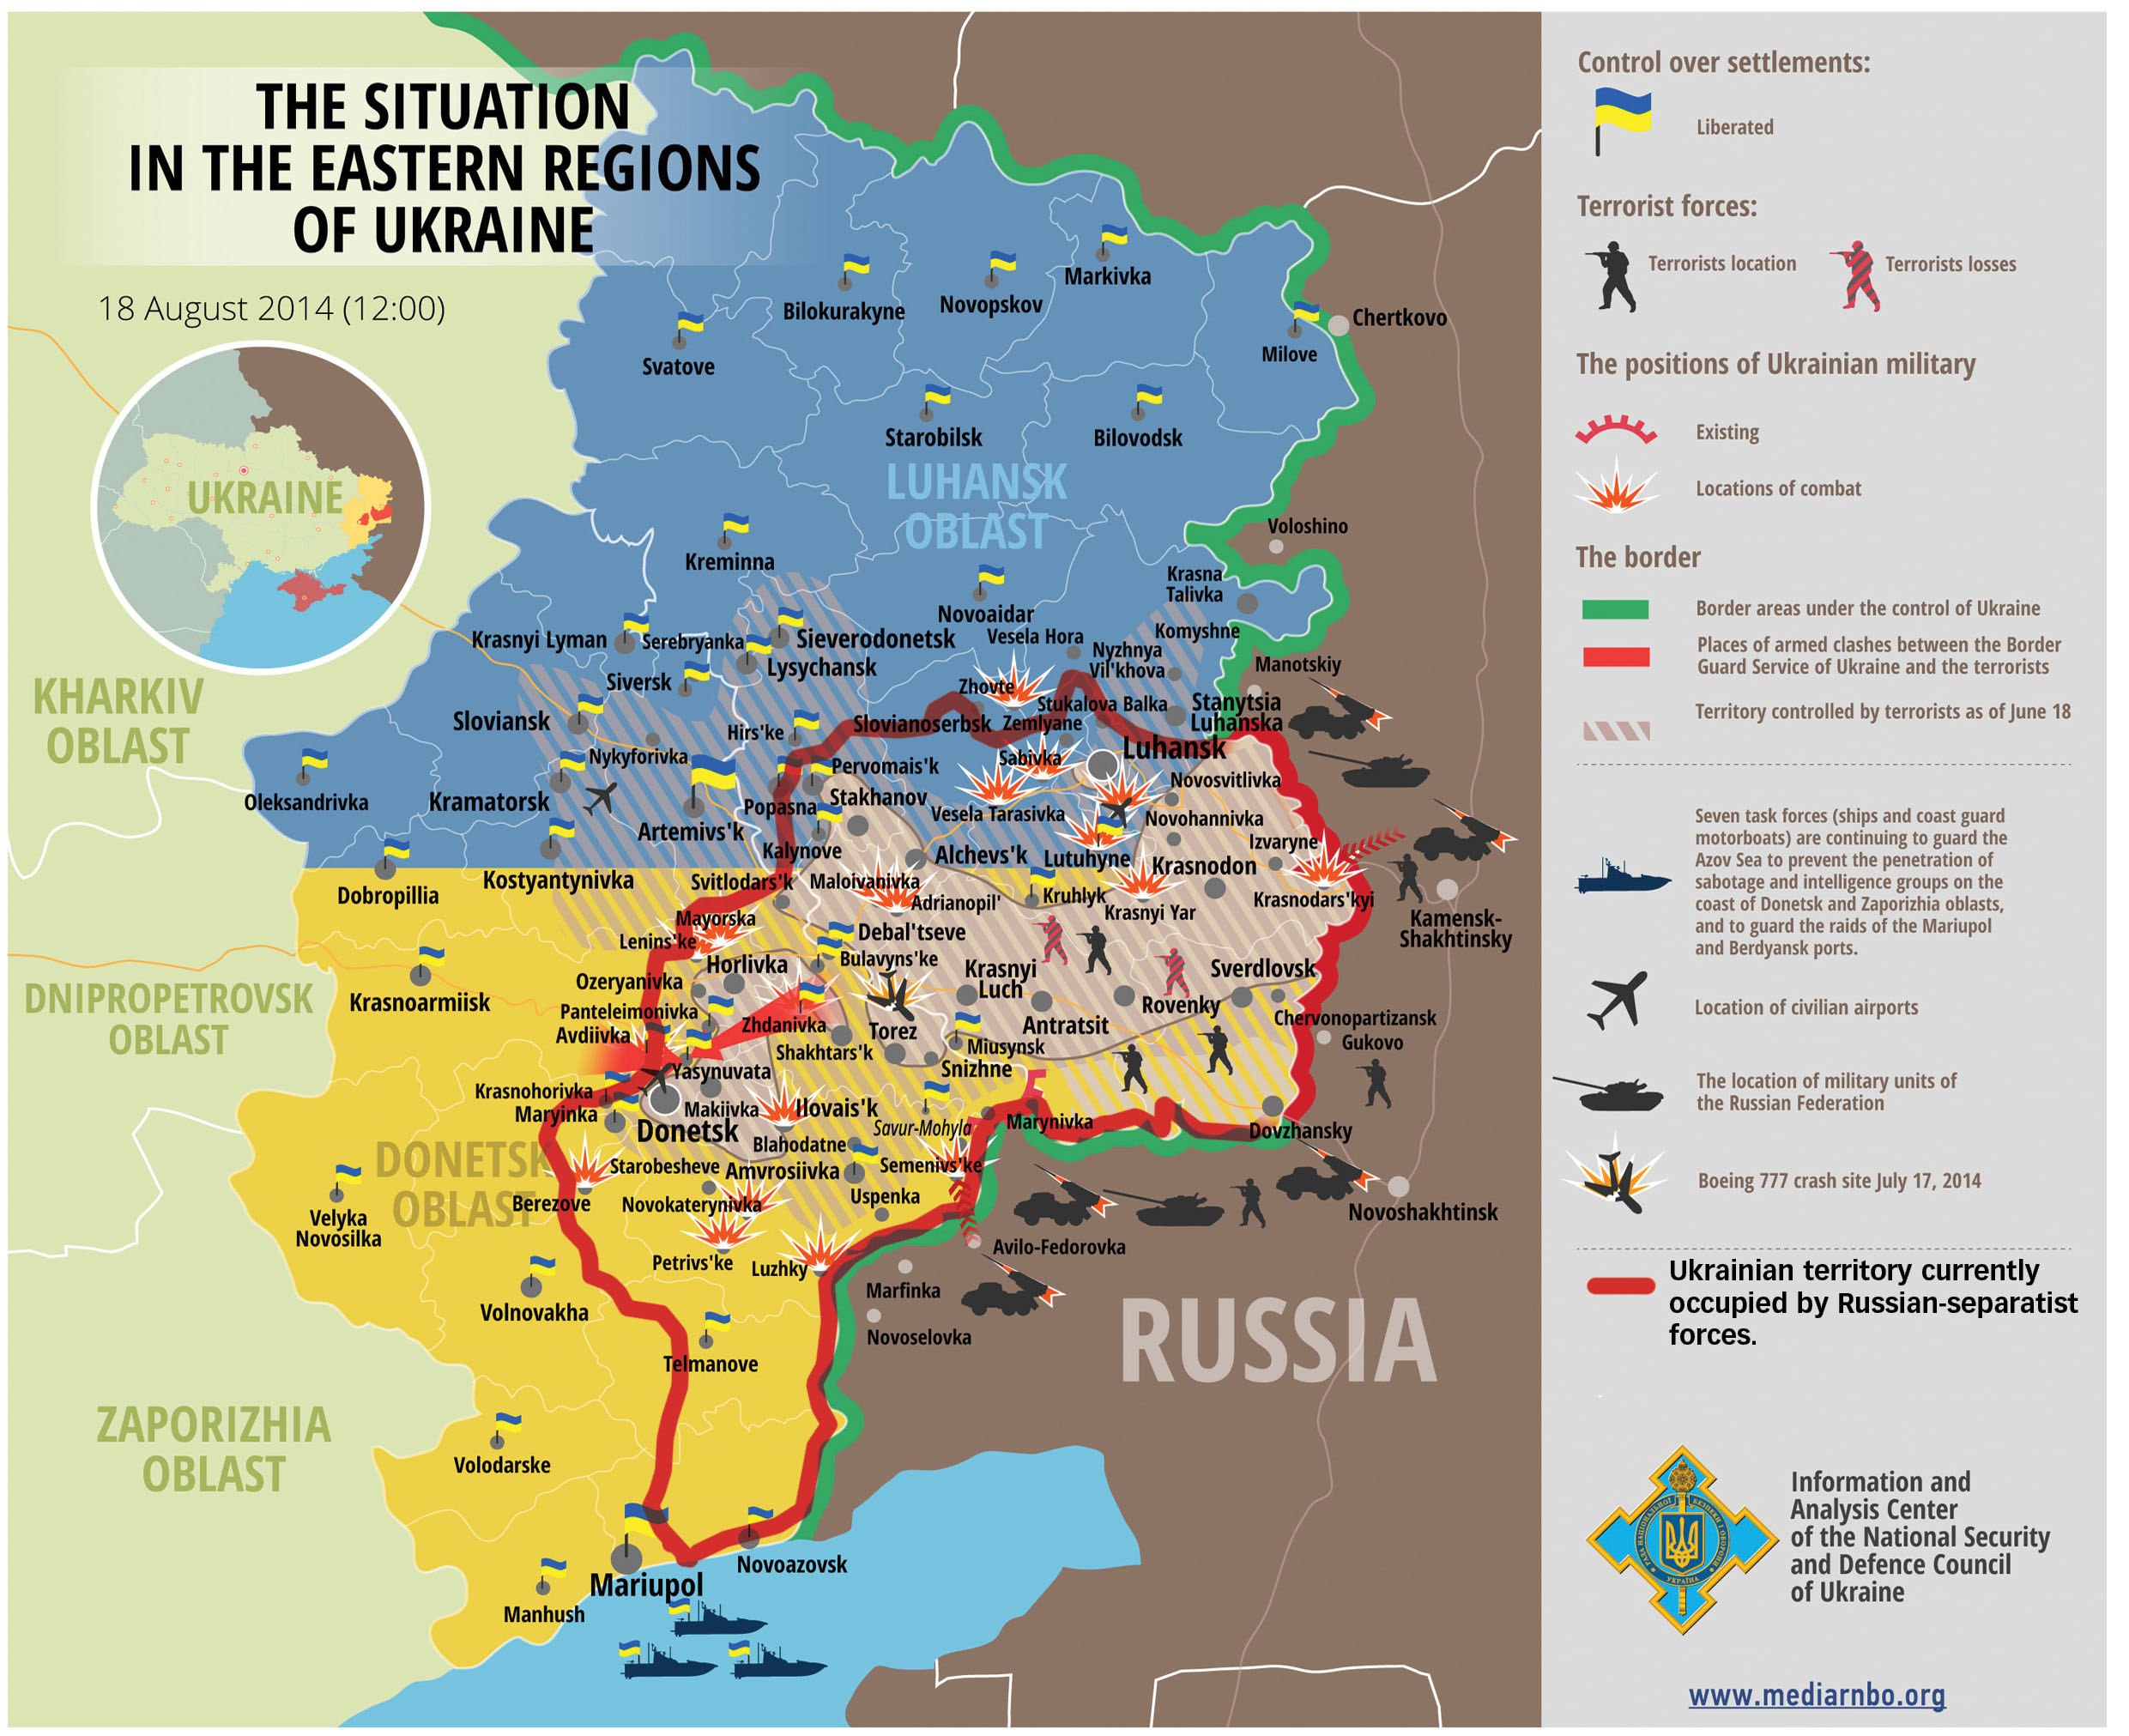 A map of the war zone in eastern Ukraine as it looked on Aug. 18, 2014, the day Ukraine’s main assault on the city of Ilovaisk started. By mid-August 2014, Ukraine’s forces had liberated 60 percent of Donetsk and Luhansk oblasts that Russian-separatist fo